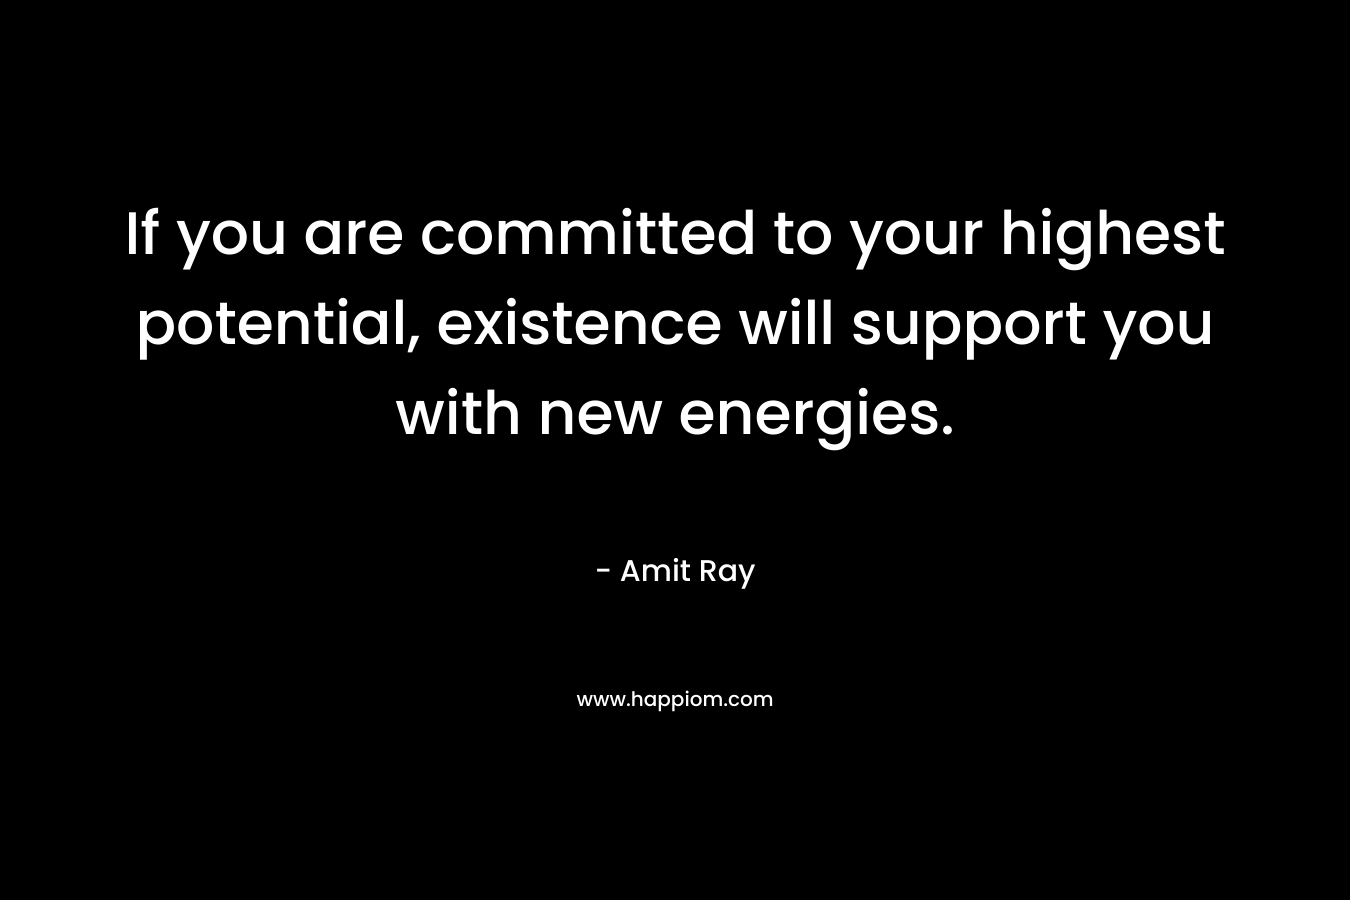 If you are committed to your highest potential, existence will support you with new energies. – Amit Ray